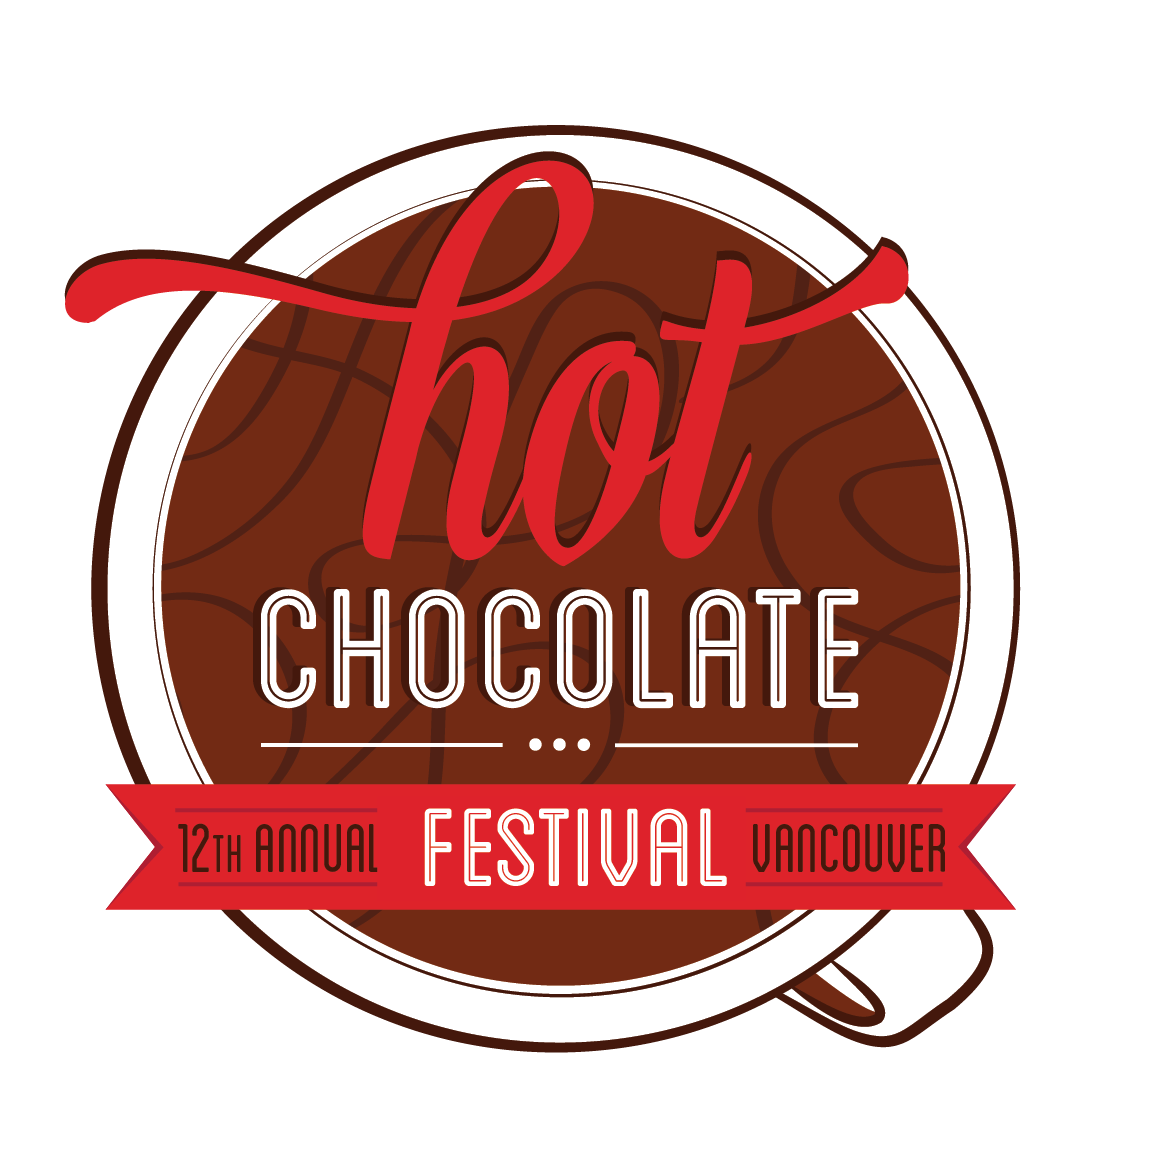 Global BC sponsors Greater Vancouver Hot Chocolate Festival - image